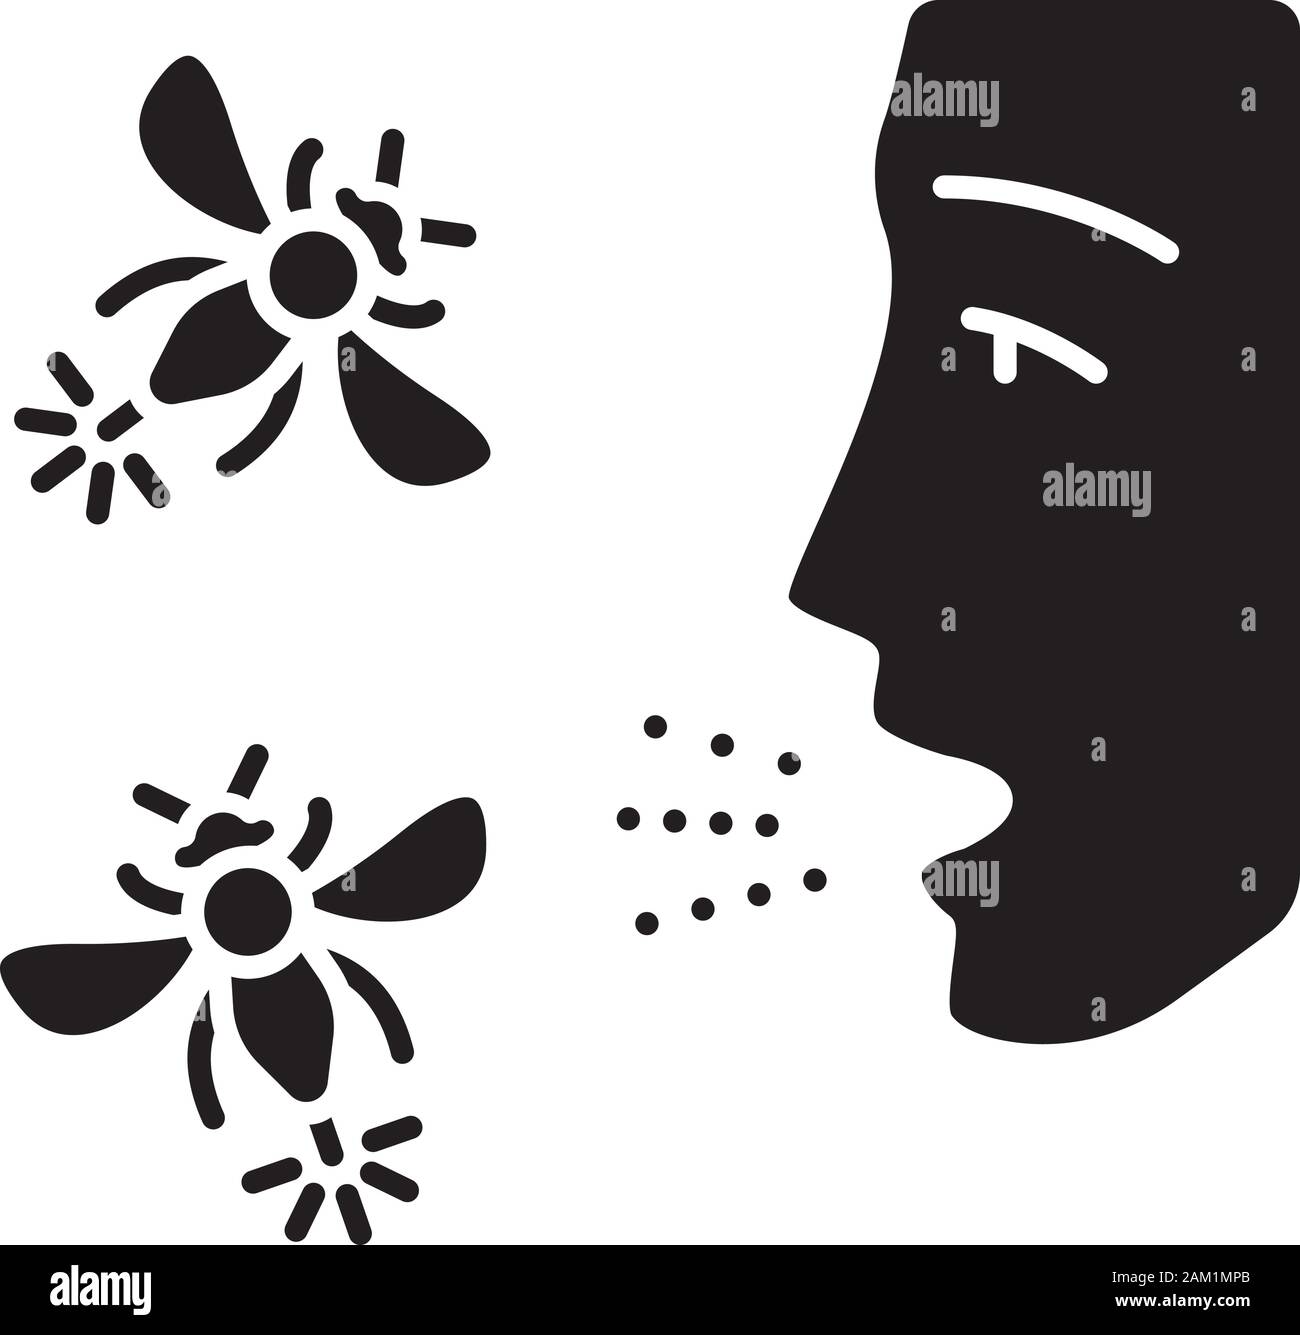 Allergies to insect stings glyph icon. Hypersensitivity of immune system. Allergic reaction to wasps, hornets and bees bites. Silhouette symbol. Negat Stock Vector